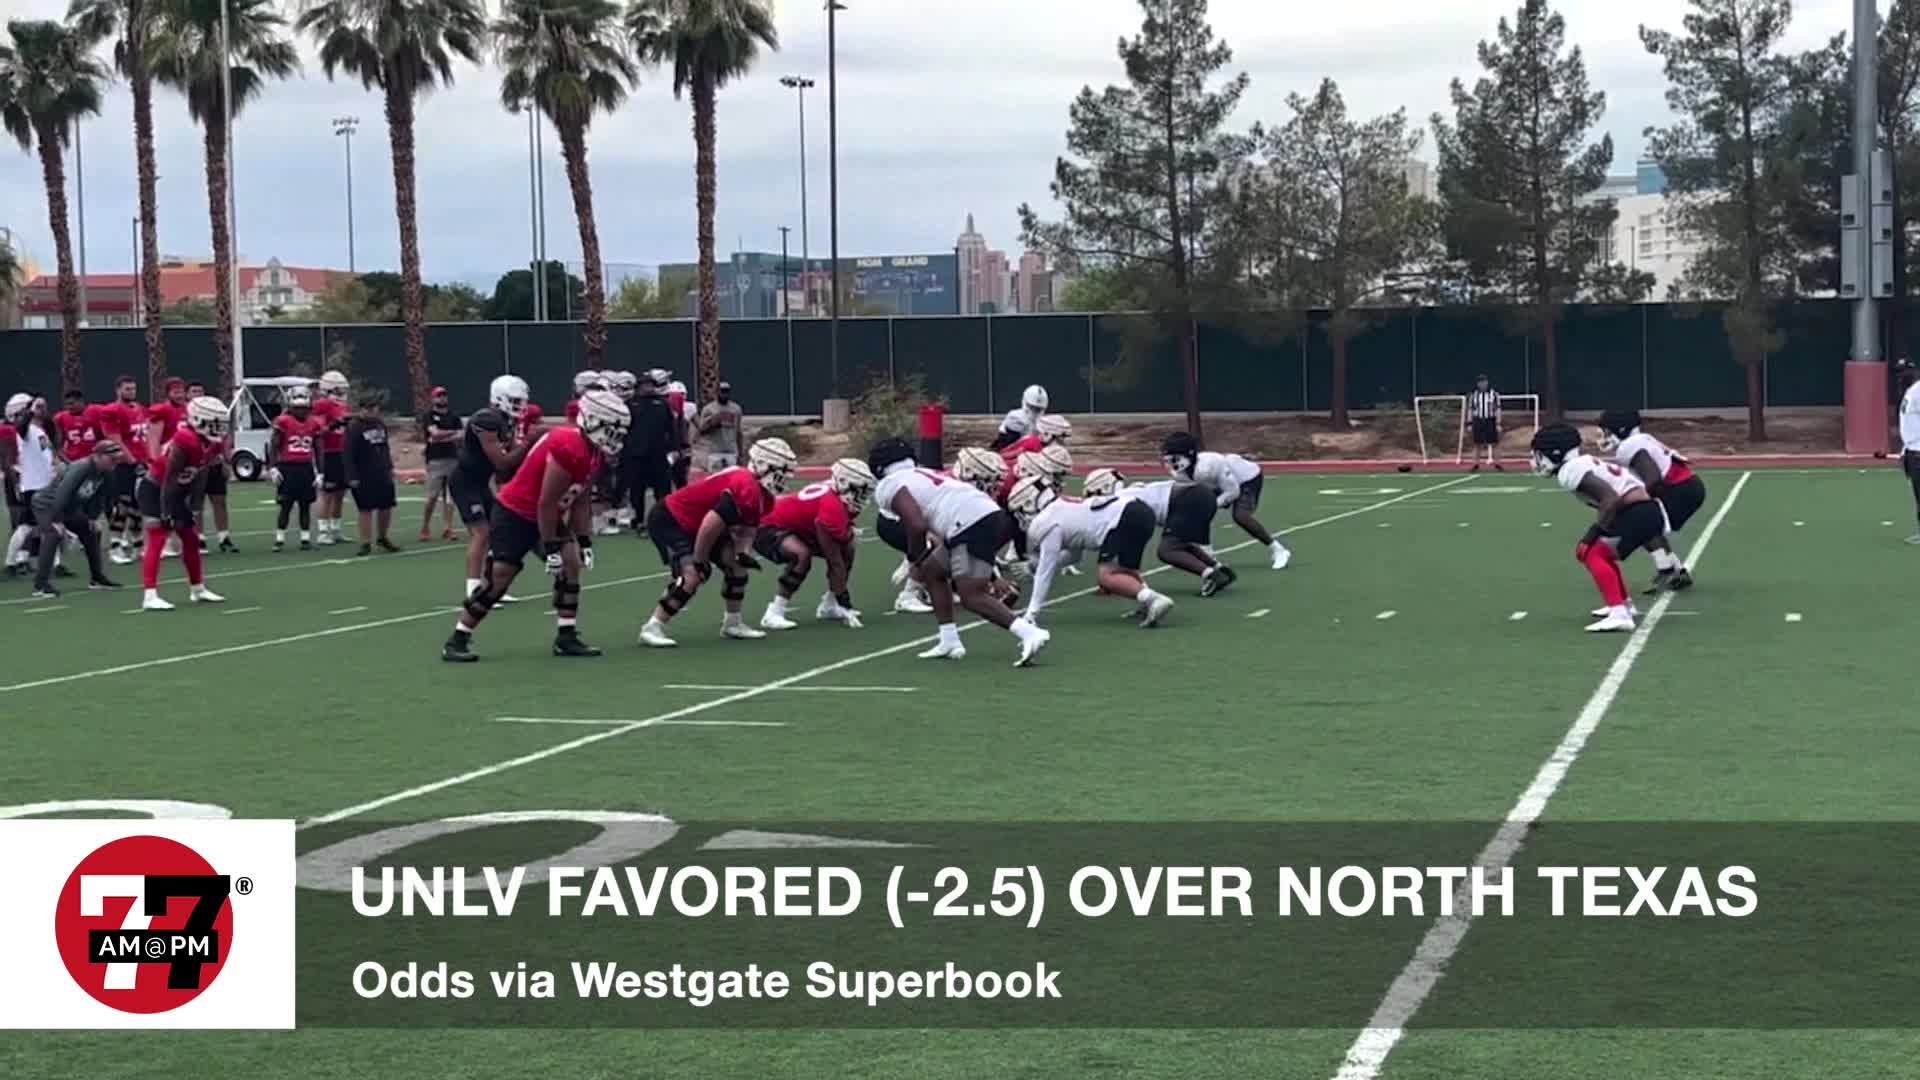 UNLV favored over North Texas